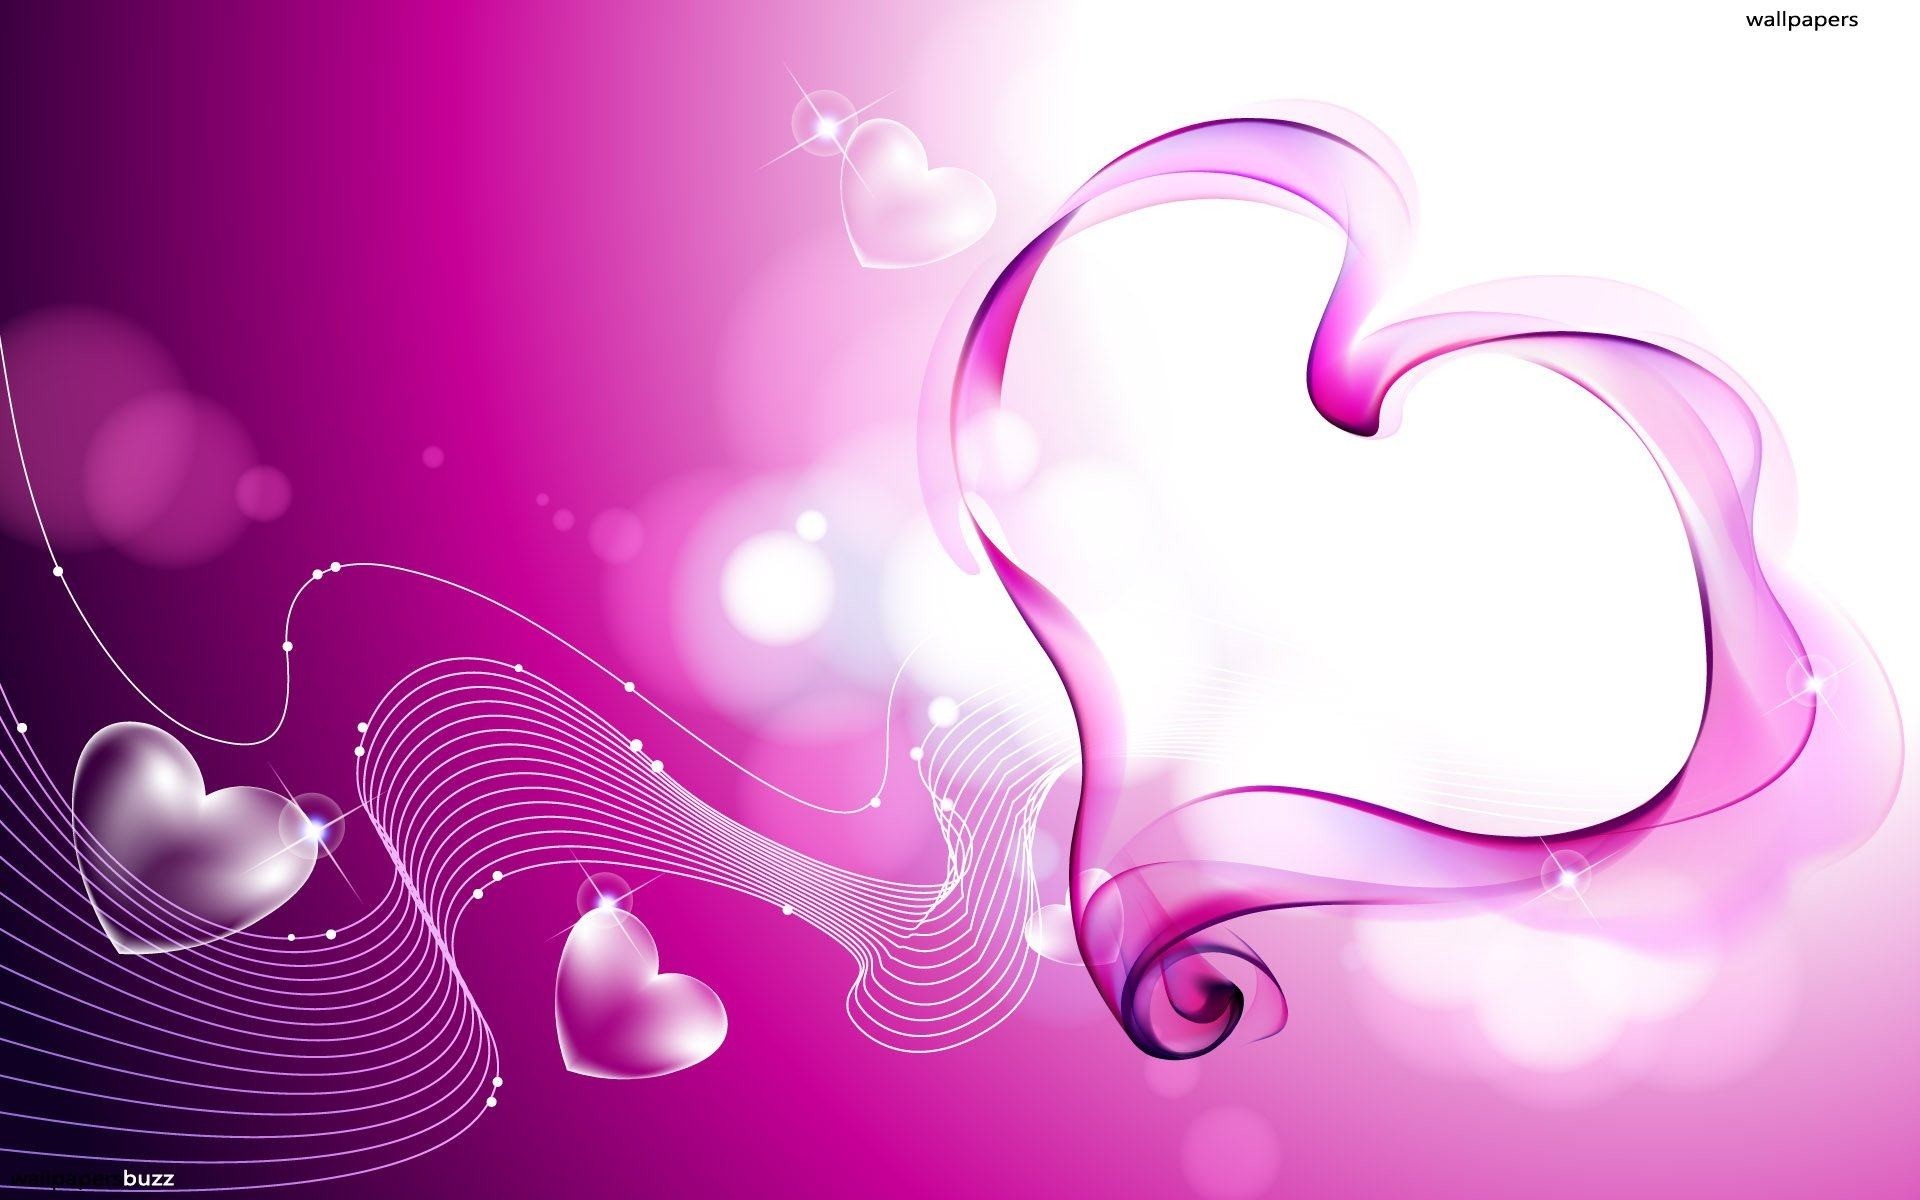 Wallpapers Backgrounds – heart pink abstract background fantasy valantines  wallpaper